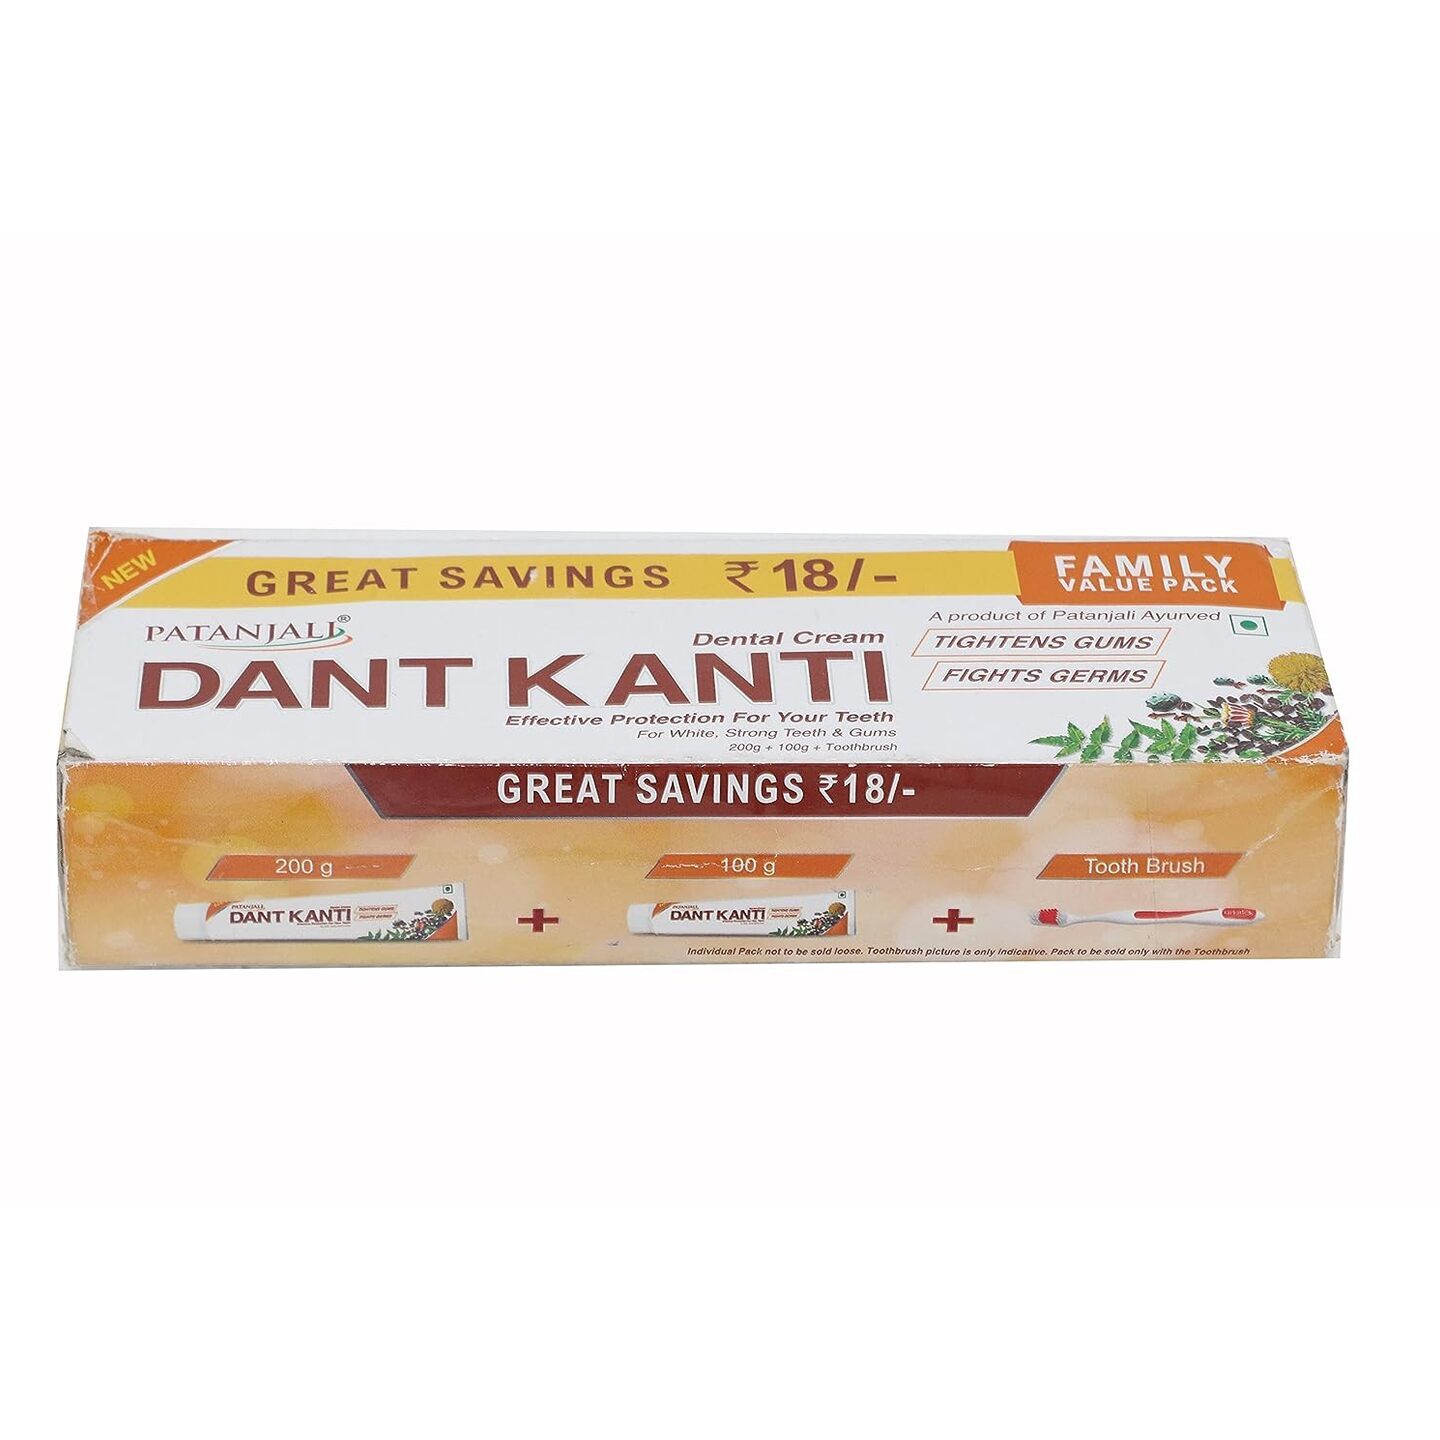 Patanjali Dant Kanti Toothpaste Value Pack 200g x 1N and 100g x 1N  300 g and Toothbrush for Cavity Protection, Eliminates Bad Breath, Gingivitis Prevention